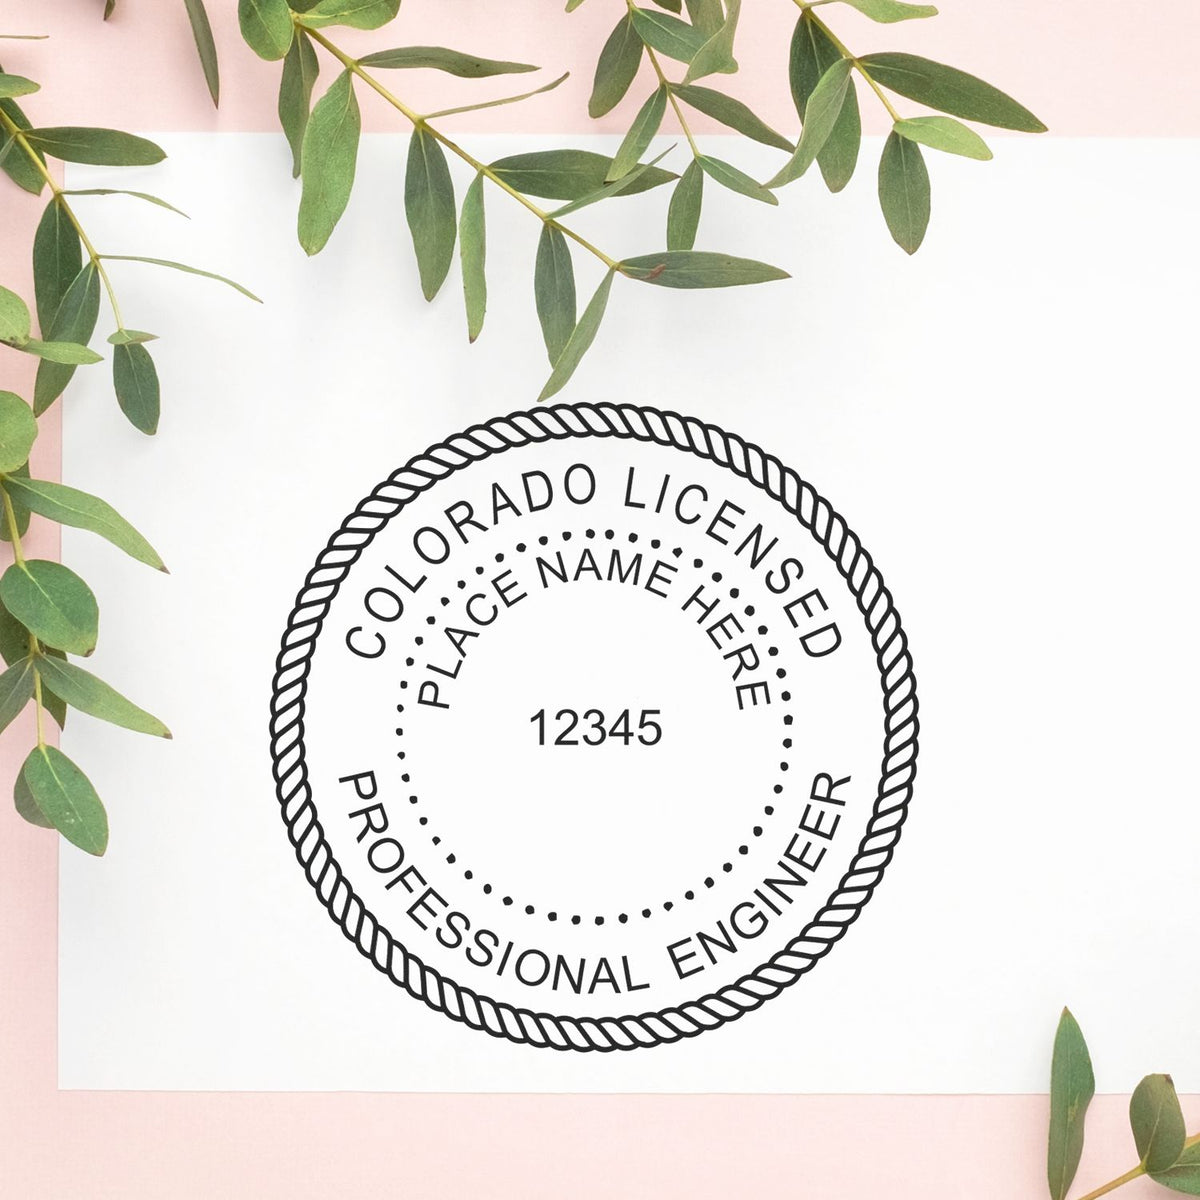 A stamped impression of the Slim Pre-Inked Colorado Professional Engineer Seal Stamp in this stylish lifestyle photo, setting the tone for a unique and personalized product.